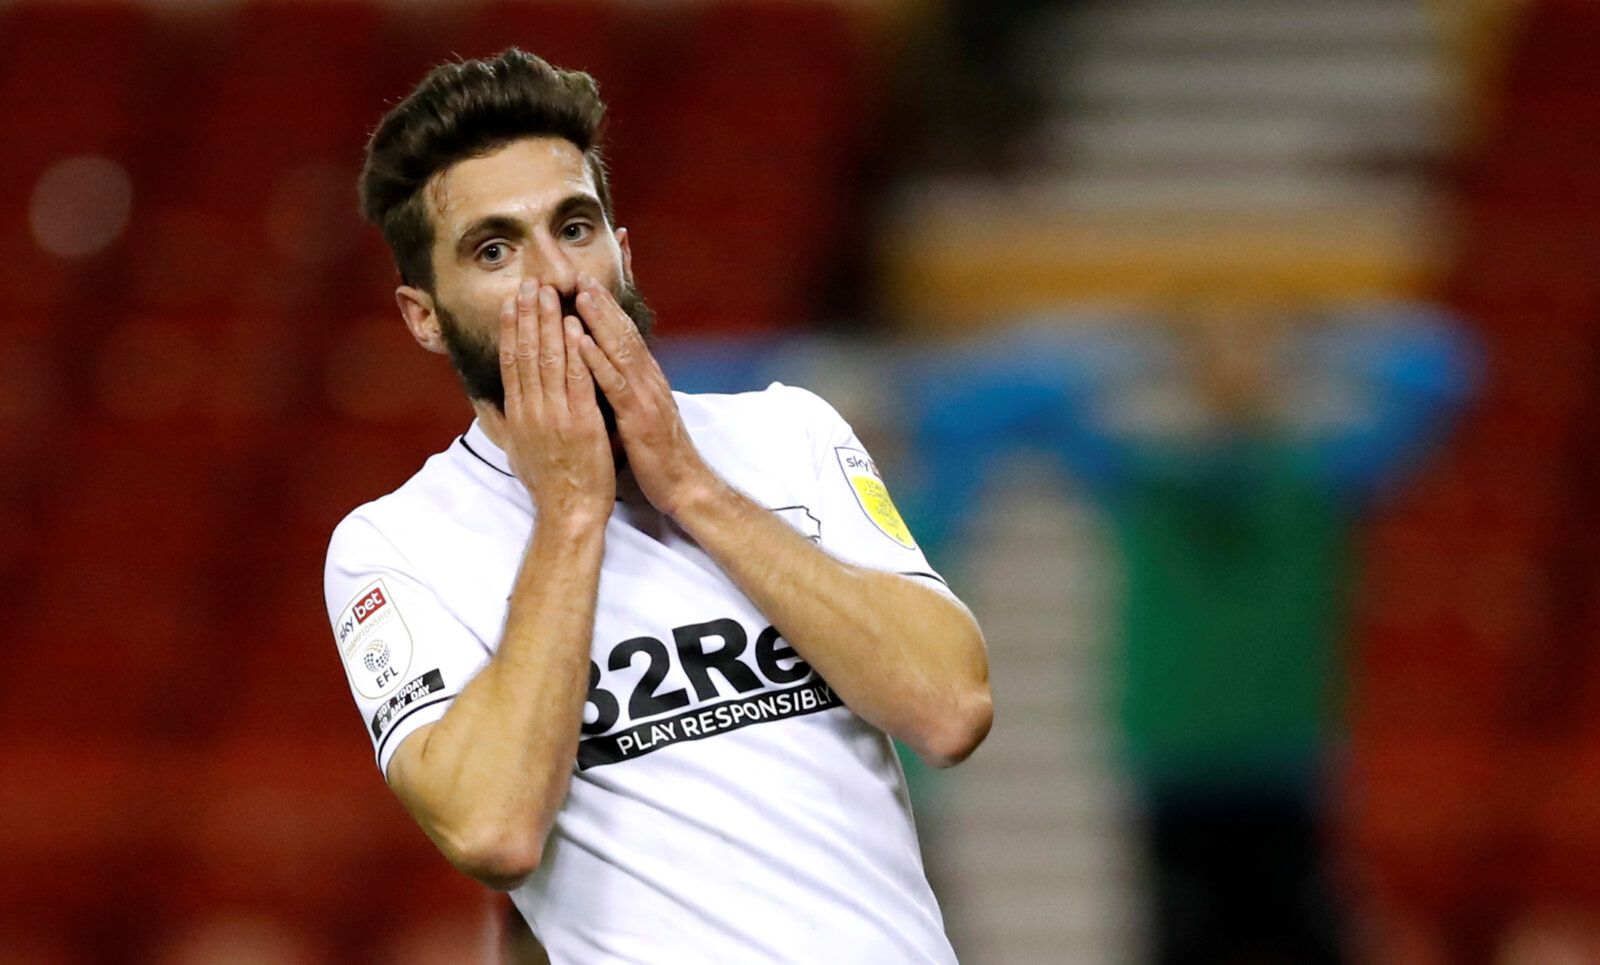 Soccer Football - Championship - Nottingham Forest v Derby County - The City Ground, Nottingham, Britain - October 23, 2020  Derby County's Graeme Shinnie reacts  Action Images/Andrew Boyers  EDITORIAL USE ONLY. No use with unauthorized audio, video, data, fixture lists, club/league logos or 